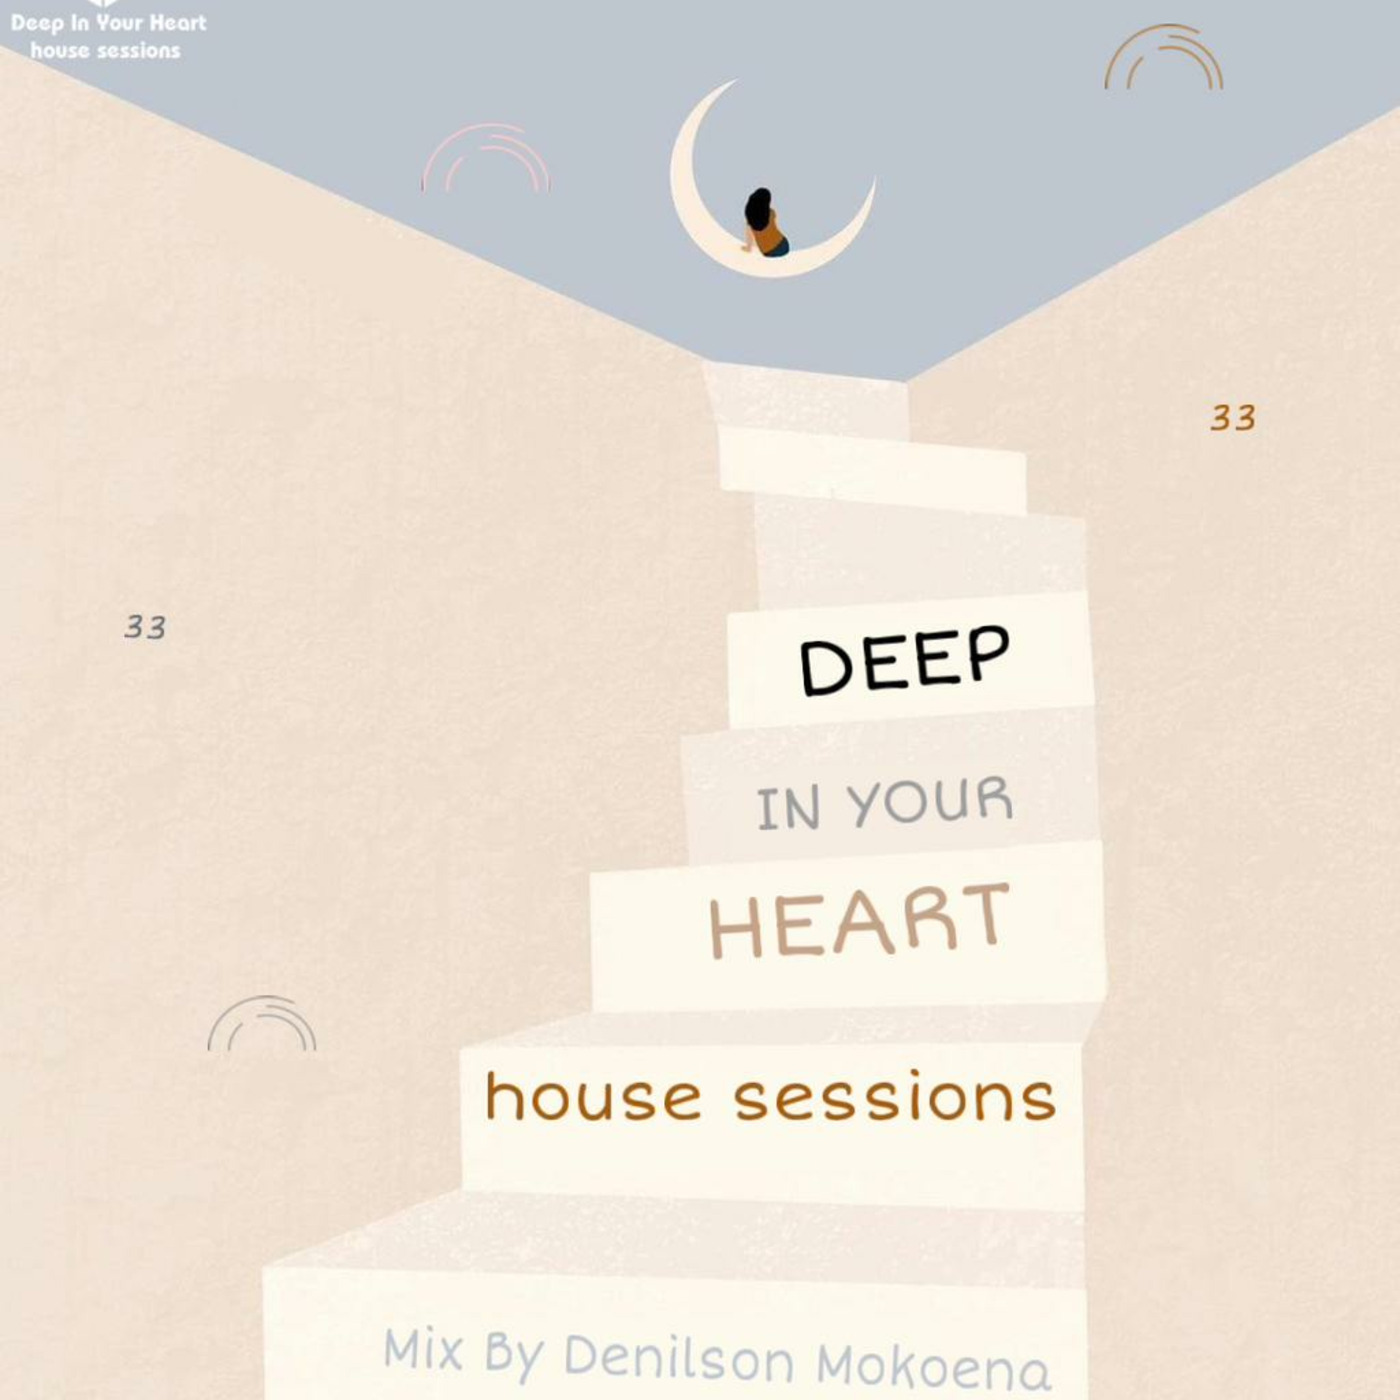 DEEP IN YOUR HEART house sessions vol 33 curated by Denilson Mokoena